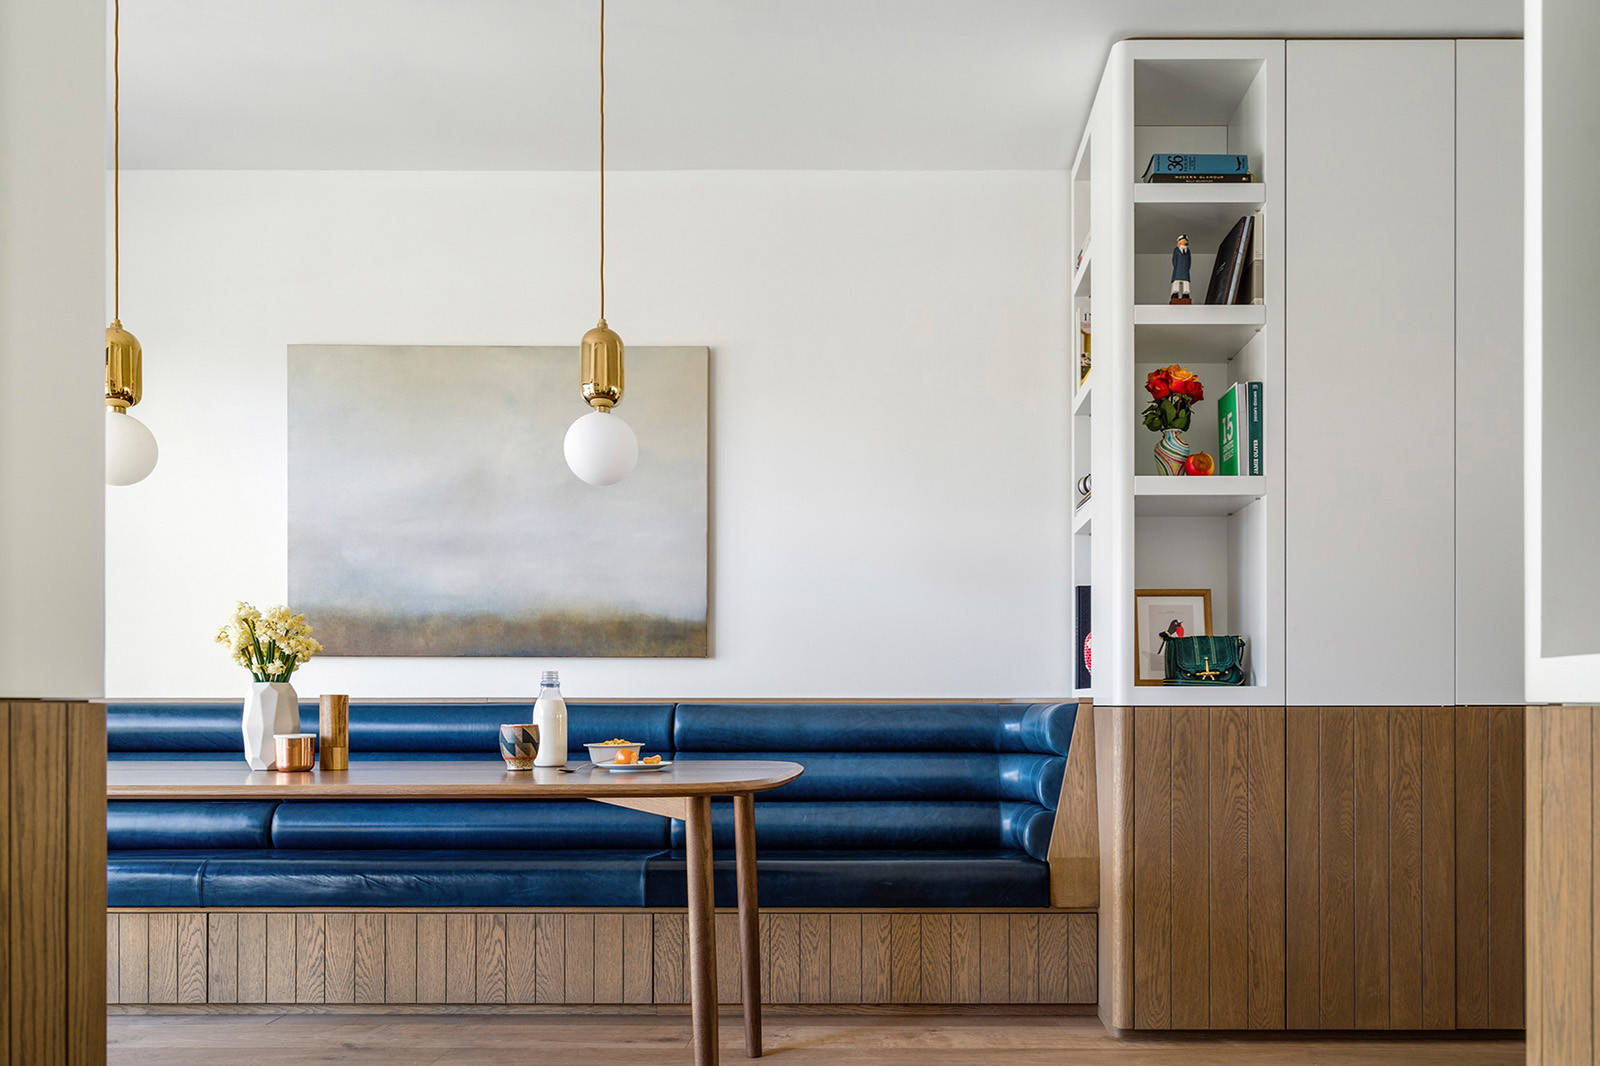 Best Of The Week: 33 Beautiful Banquettes And Built-In Benches | Houzz Au